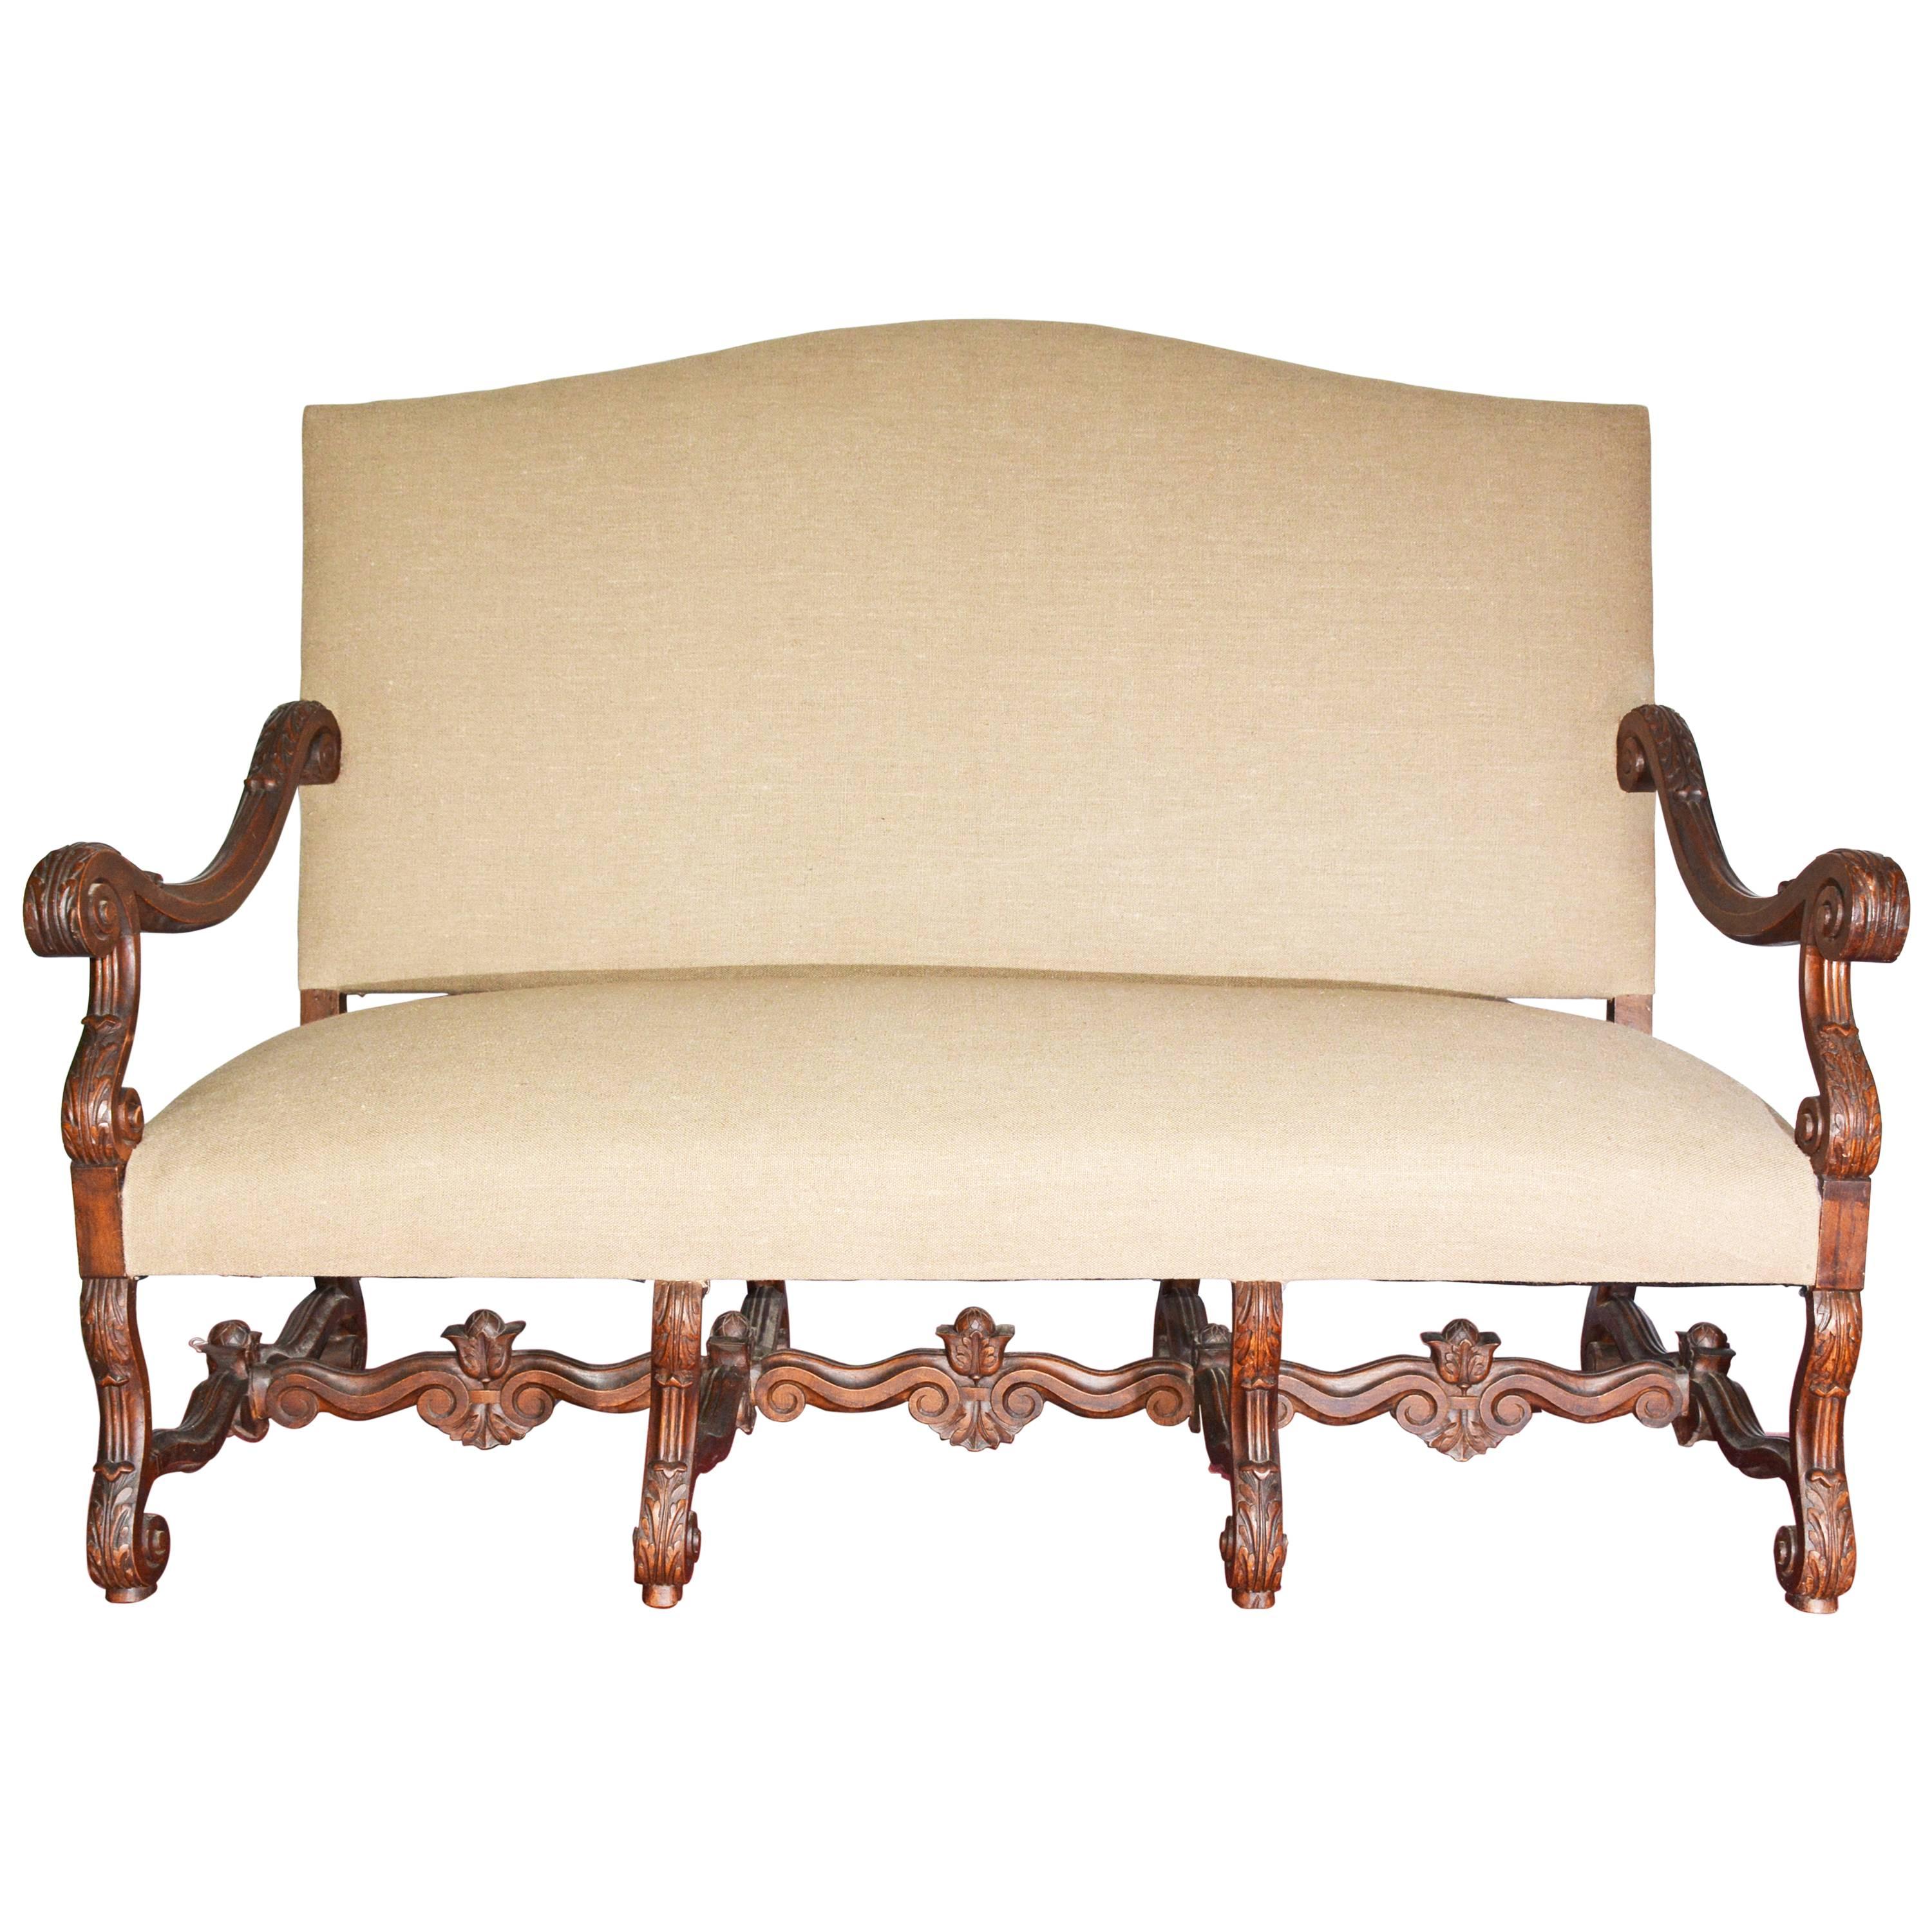 19th Century French Baroque Camelback Throne Settee